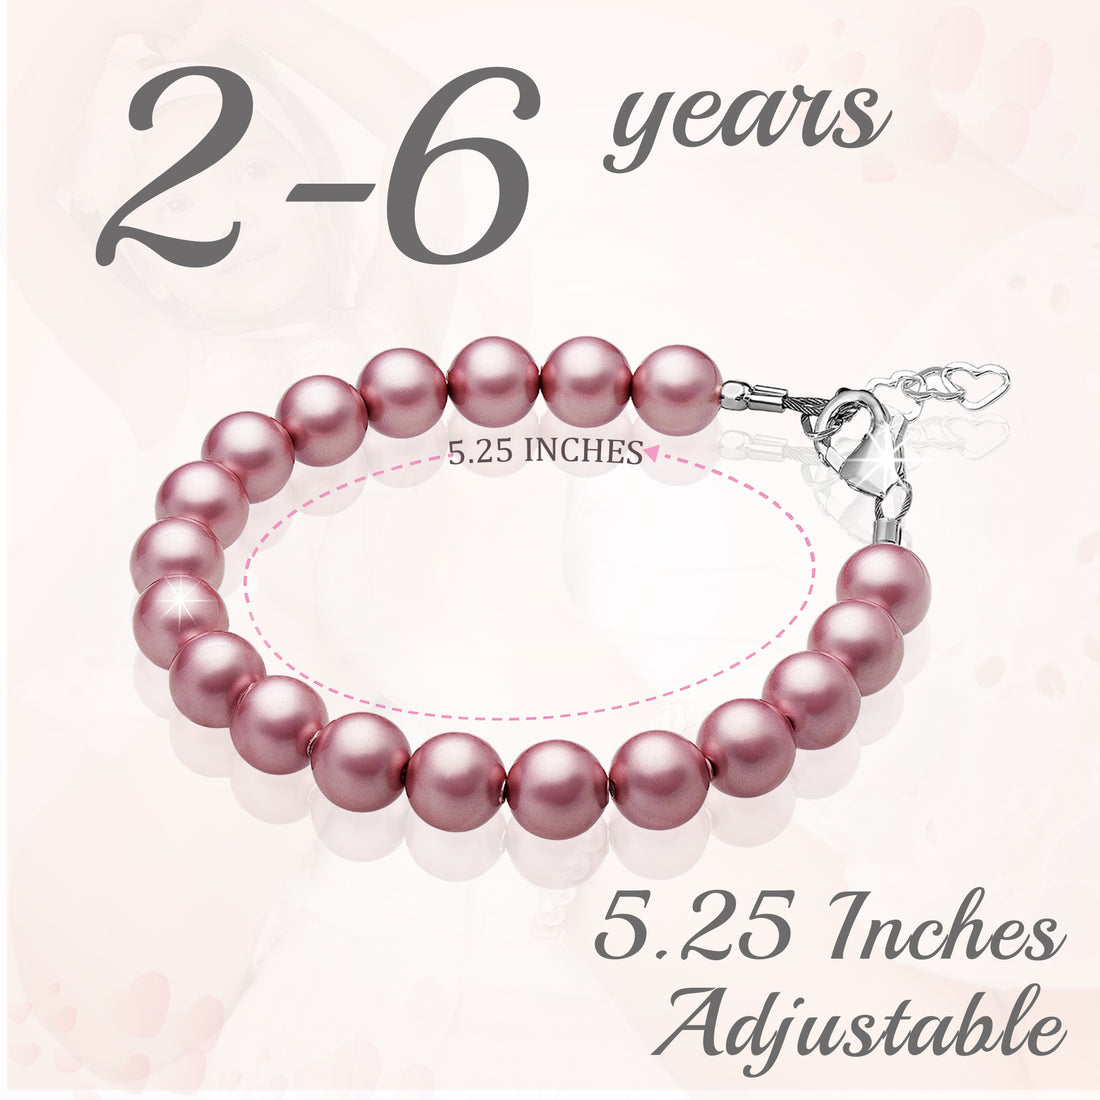 Sterling Silver Bracelet for girls with Rose Pearls